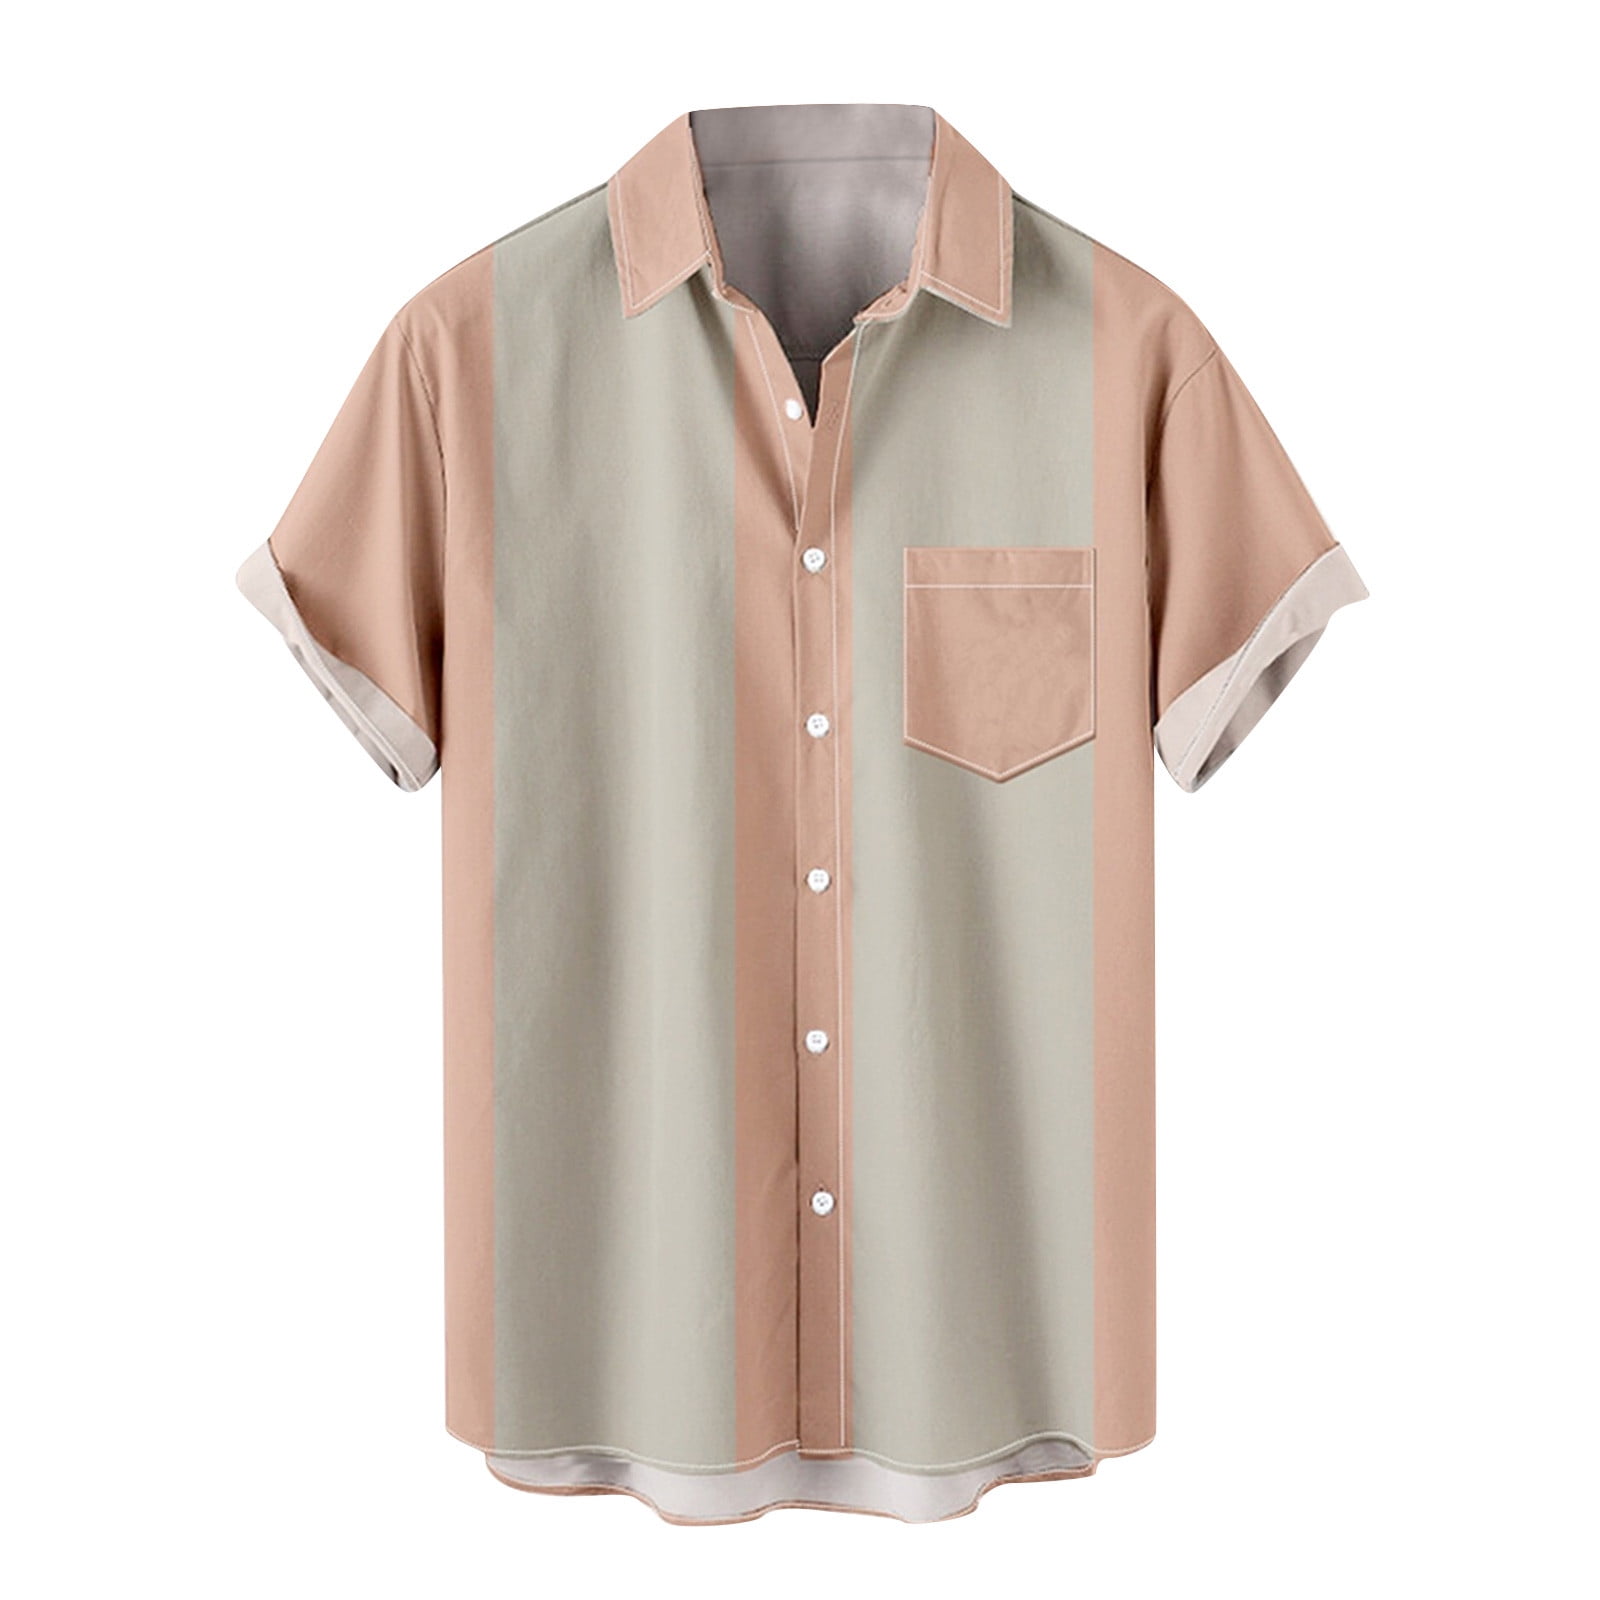 Shirts for Men Men Casual Plain Buttons Beach with Pocket